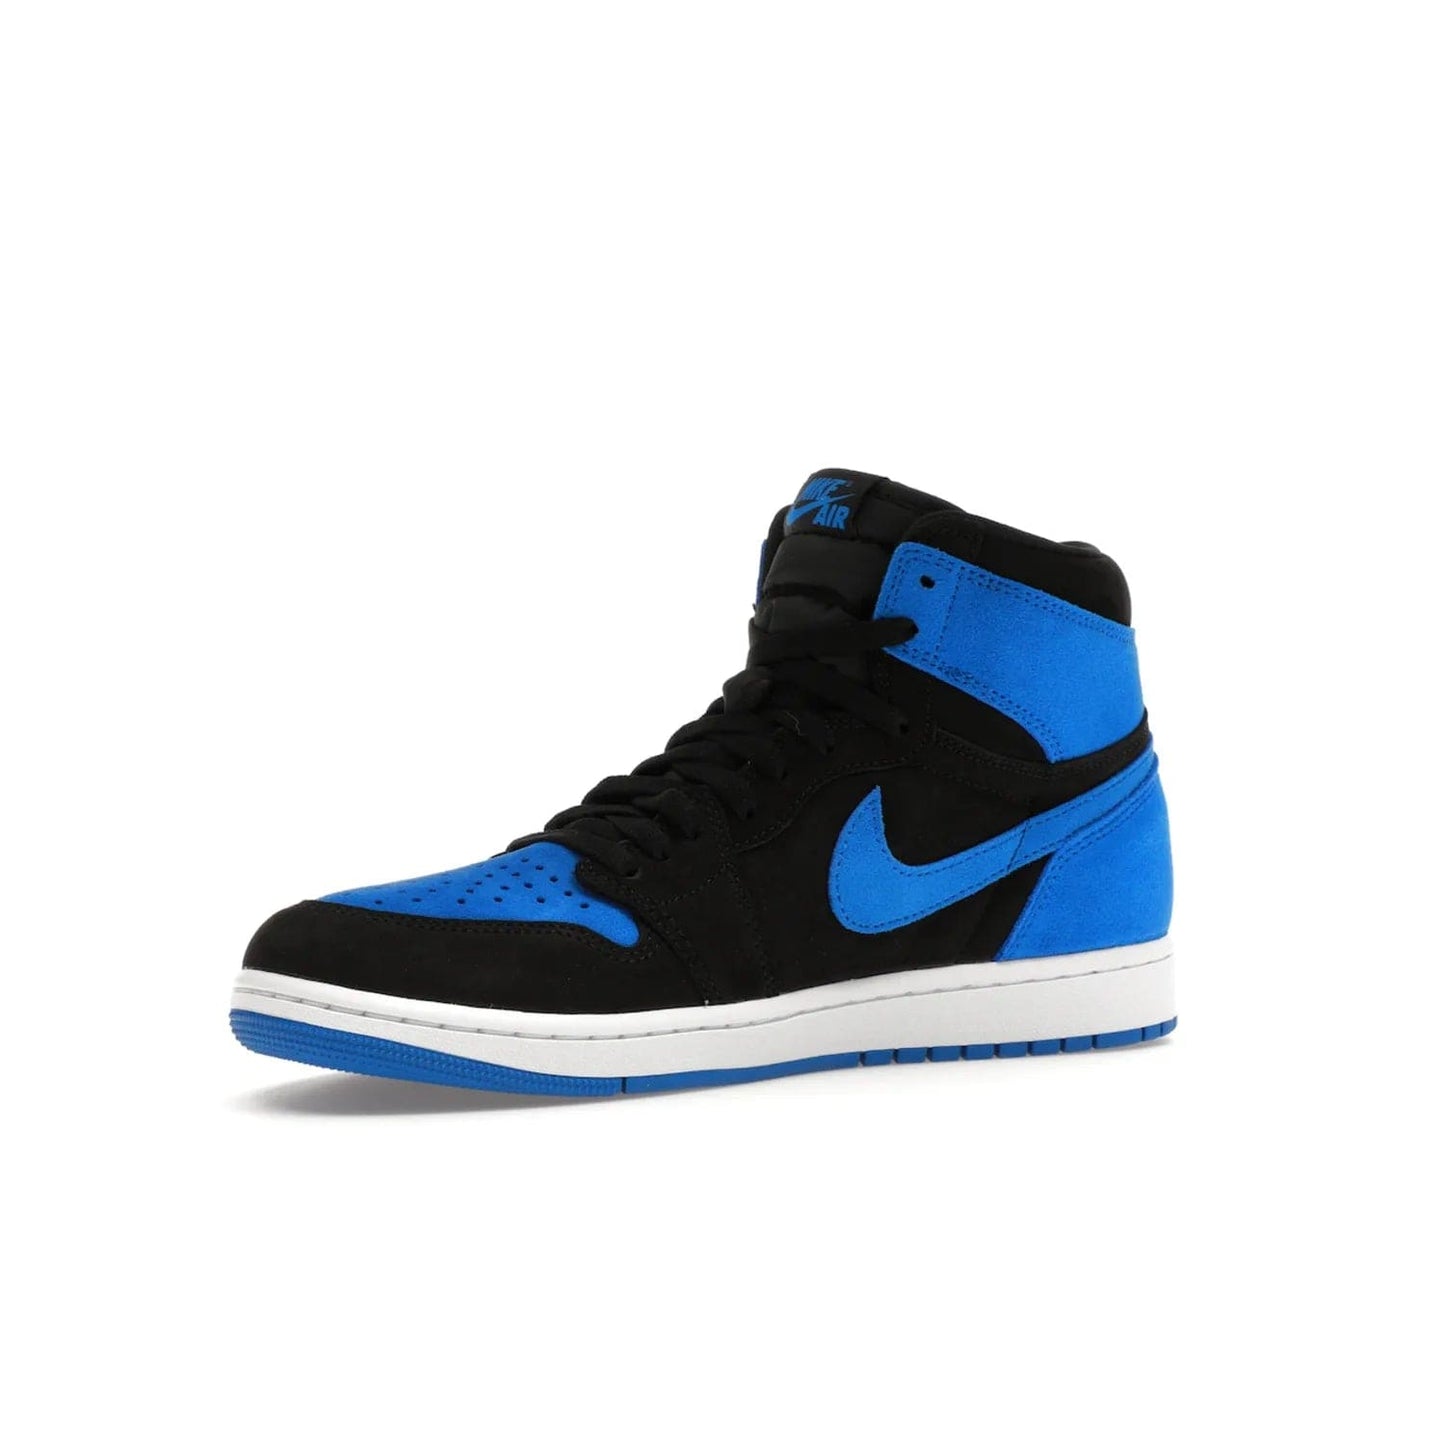 Jordan 1 Retro High OG Royal Reimagined - Image 16 - Only at www.BallersClubKickz.com - ####
Old meets the new: Jordan 1 Retro High OG 'Royal Reimagined' is a bold statement of evolution with its royal blue and black suede material makeup. Swoosh overlays, Wings logos, padded ankle collars and Nike Air tags maintain the OG's legendary lineage. Get a pair on November 4th and be part of a fearless, unyielding story.